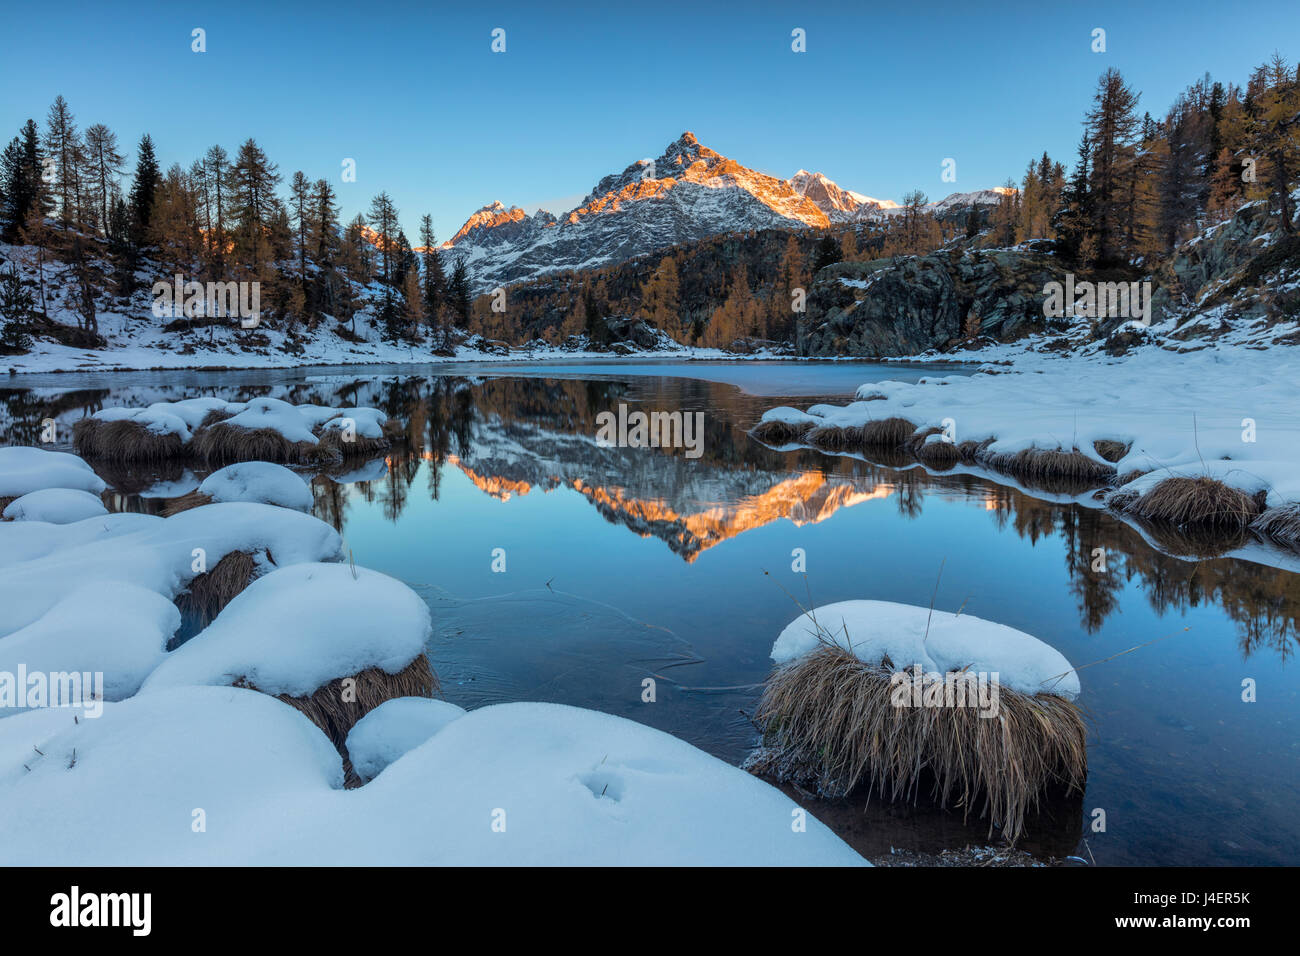 The rocky peak reflected in the frozen Lake Mufule at dawn, Malenco Valley, Province of Sondrio, Valtellina, Lombardy, Italy Stock Photo